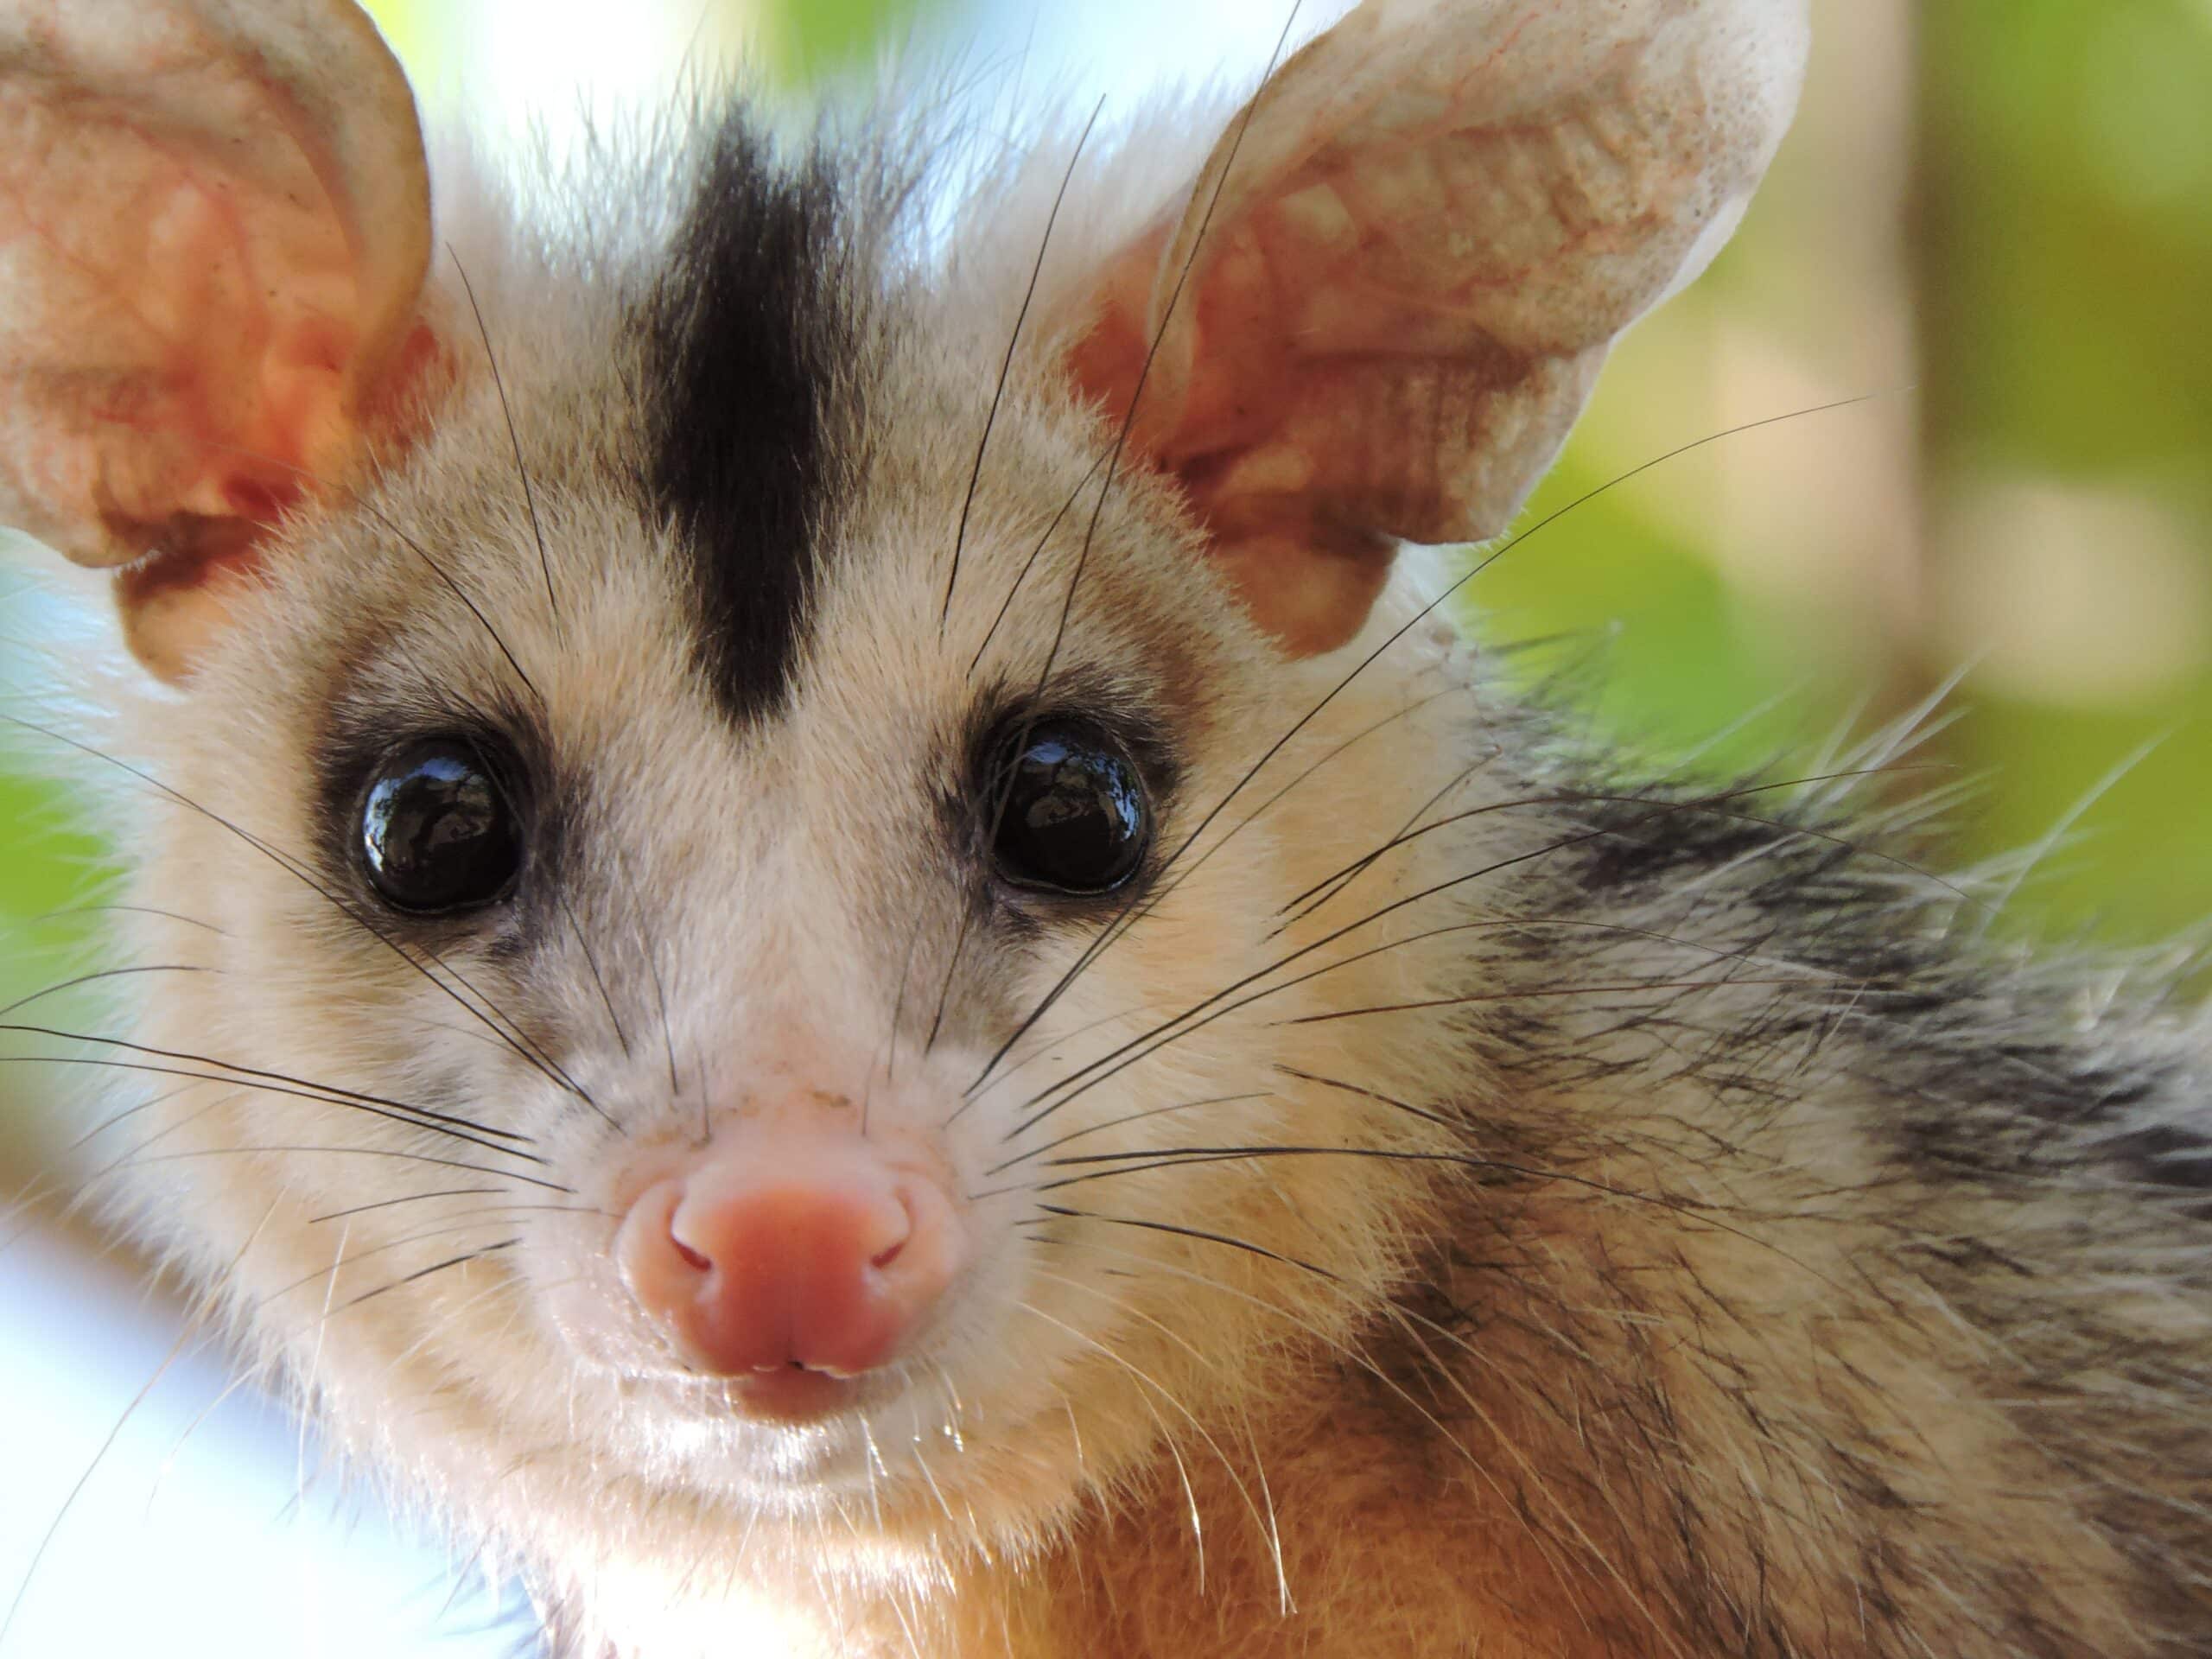 Wild Possum Management A Guide to Understanding, Removing, and Controlling Virginia Opossums (Didelphis virginiana)